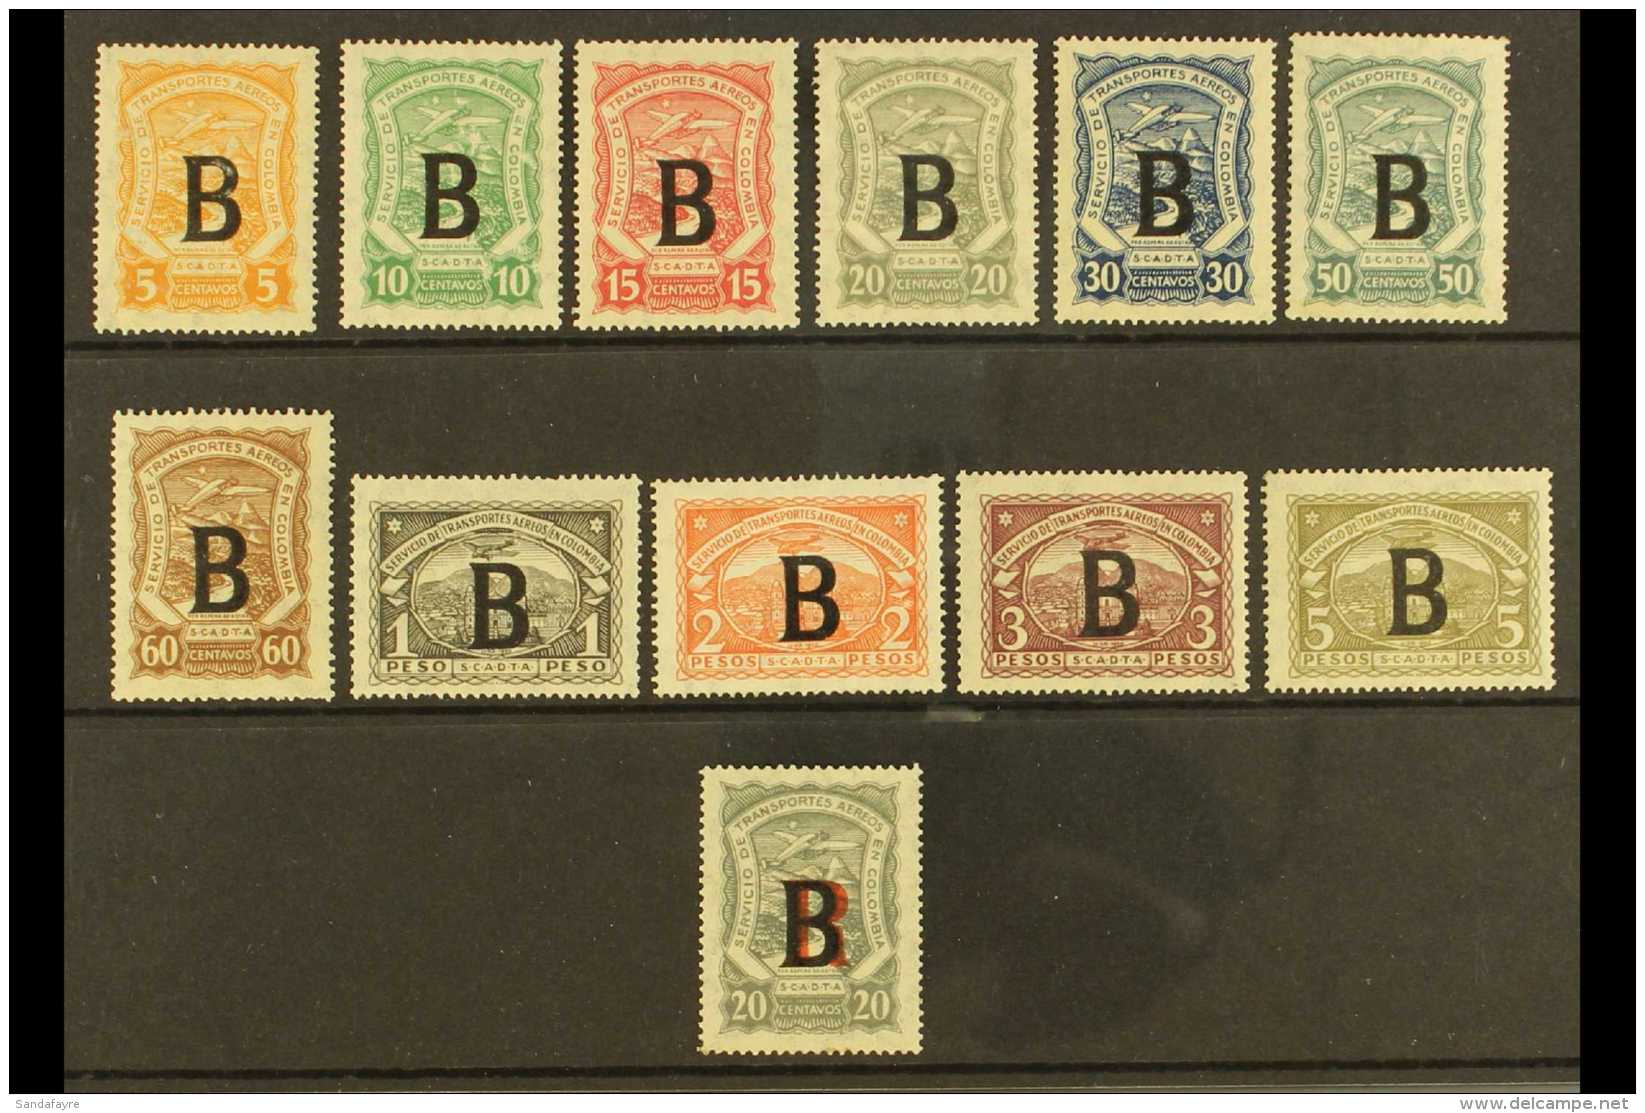 SCADTA  BELGIUM 1923 Complete Set With "B" Consular Overprints Inc 20c Registration Stamp With "R" 10mm High ... - Colombia